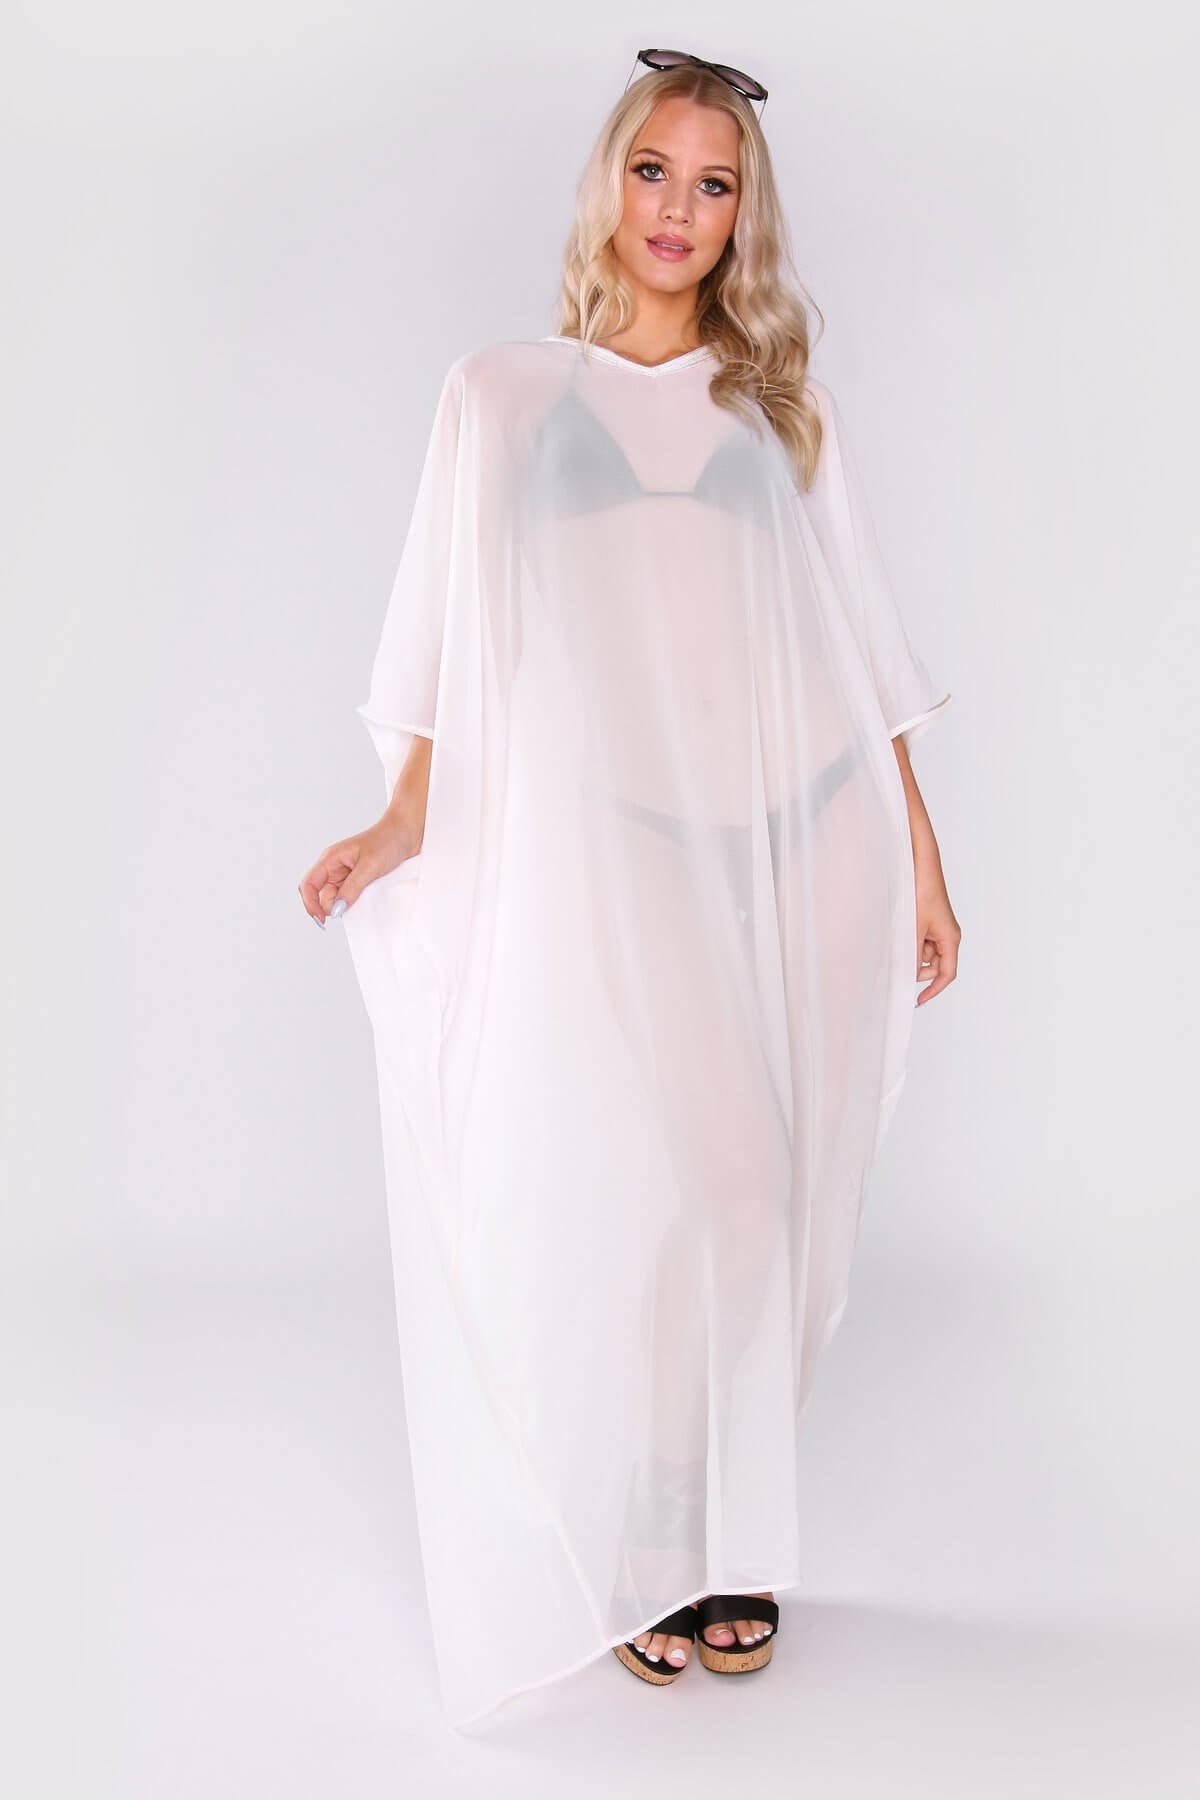 sheer cover up for evening dress